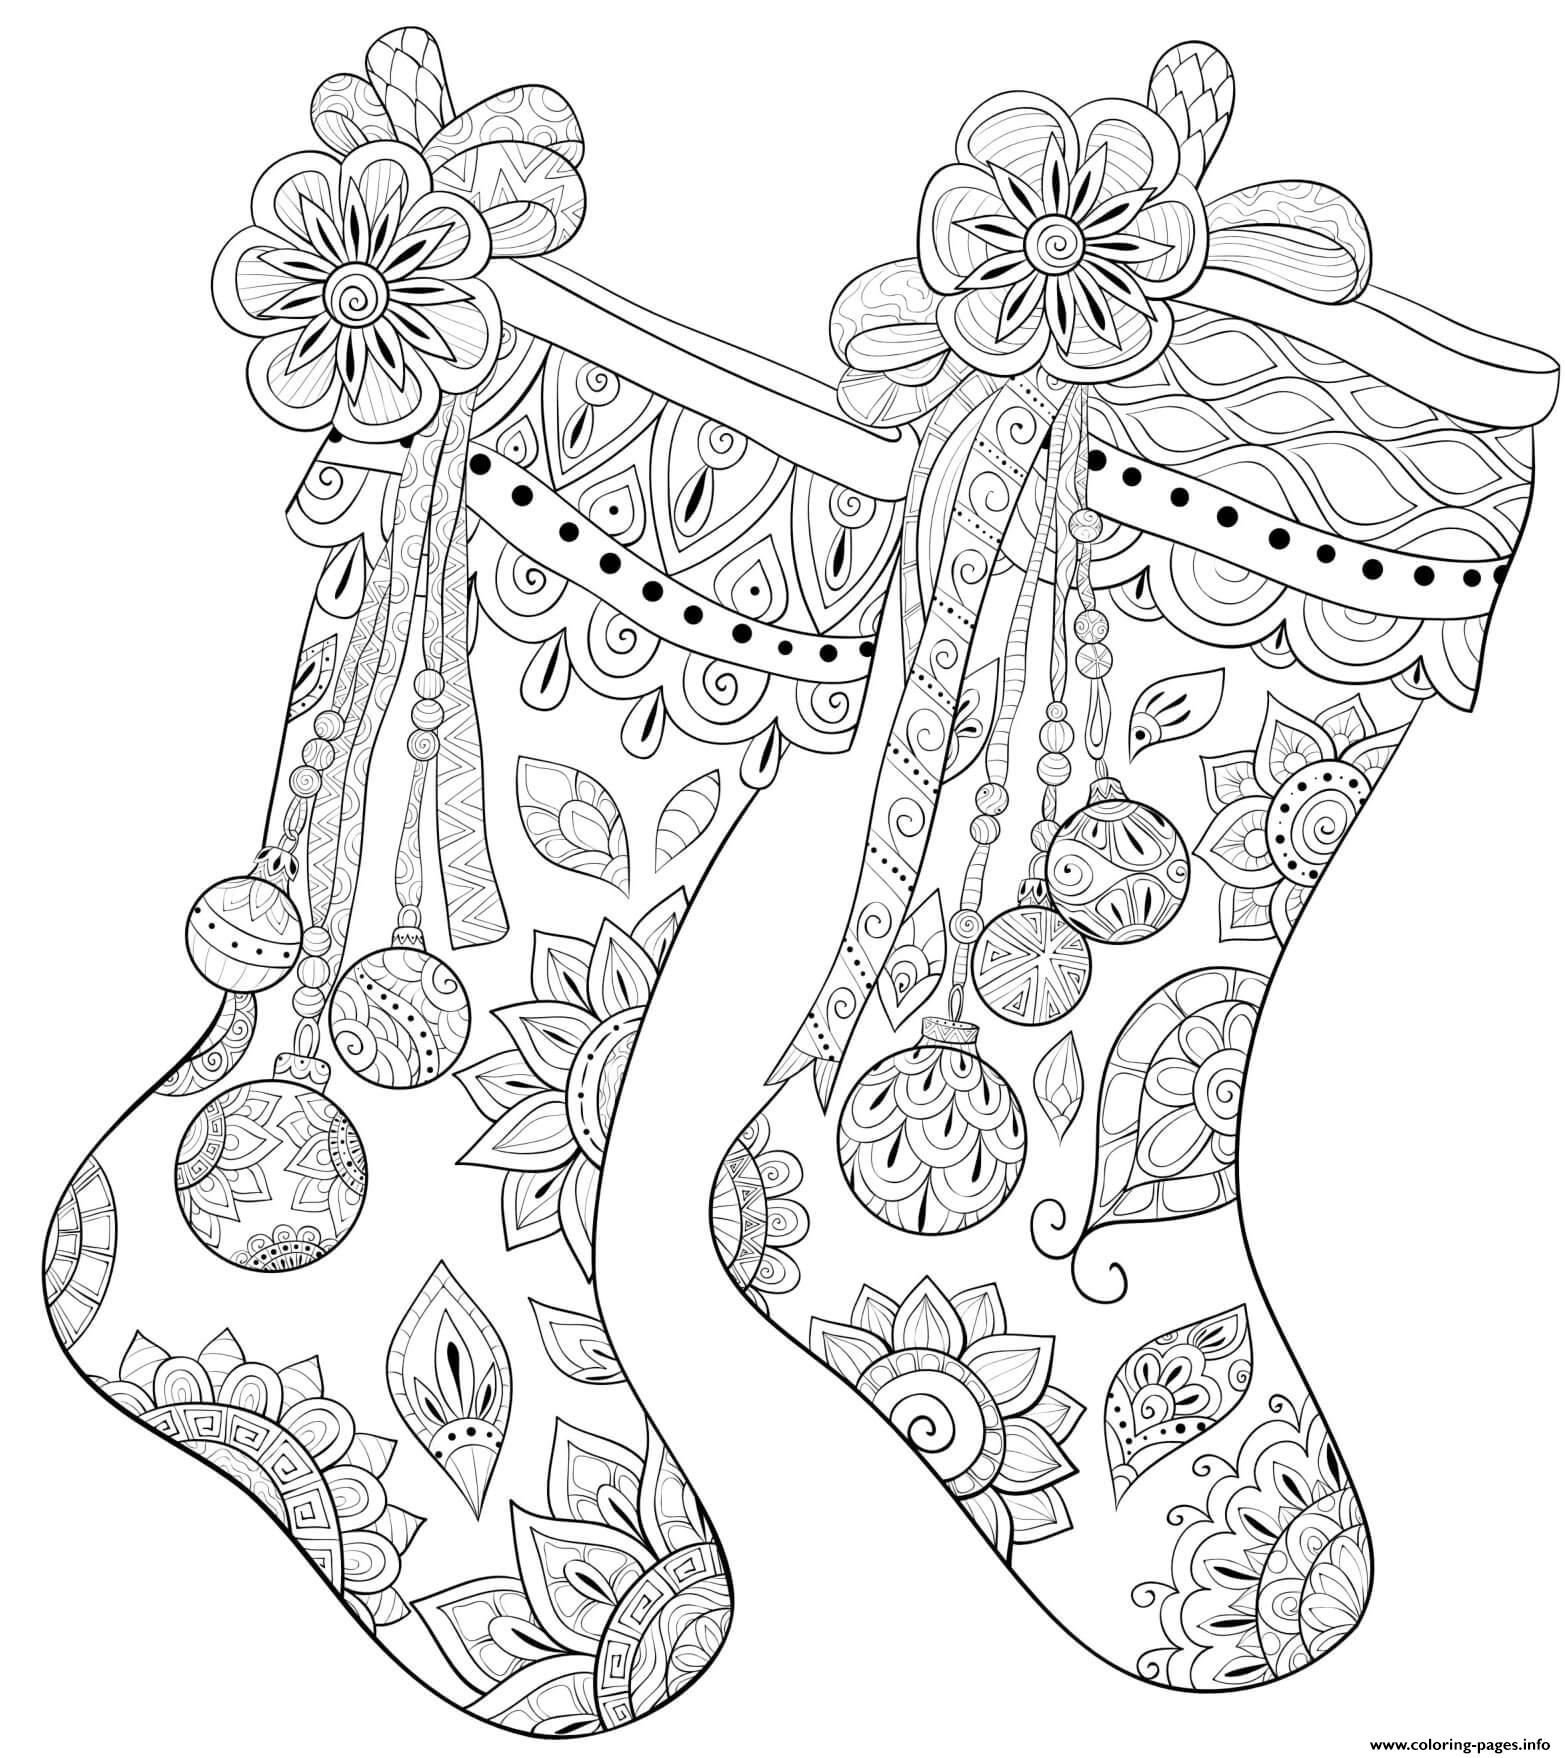 Christmas For Adults Patterned Stockings coloring